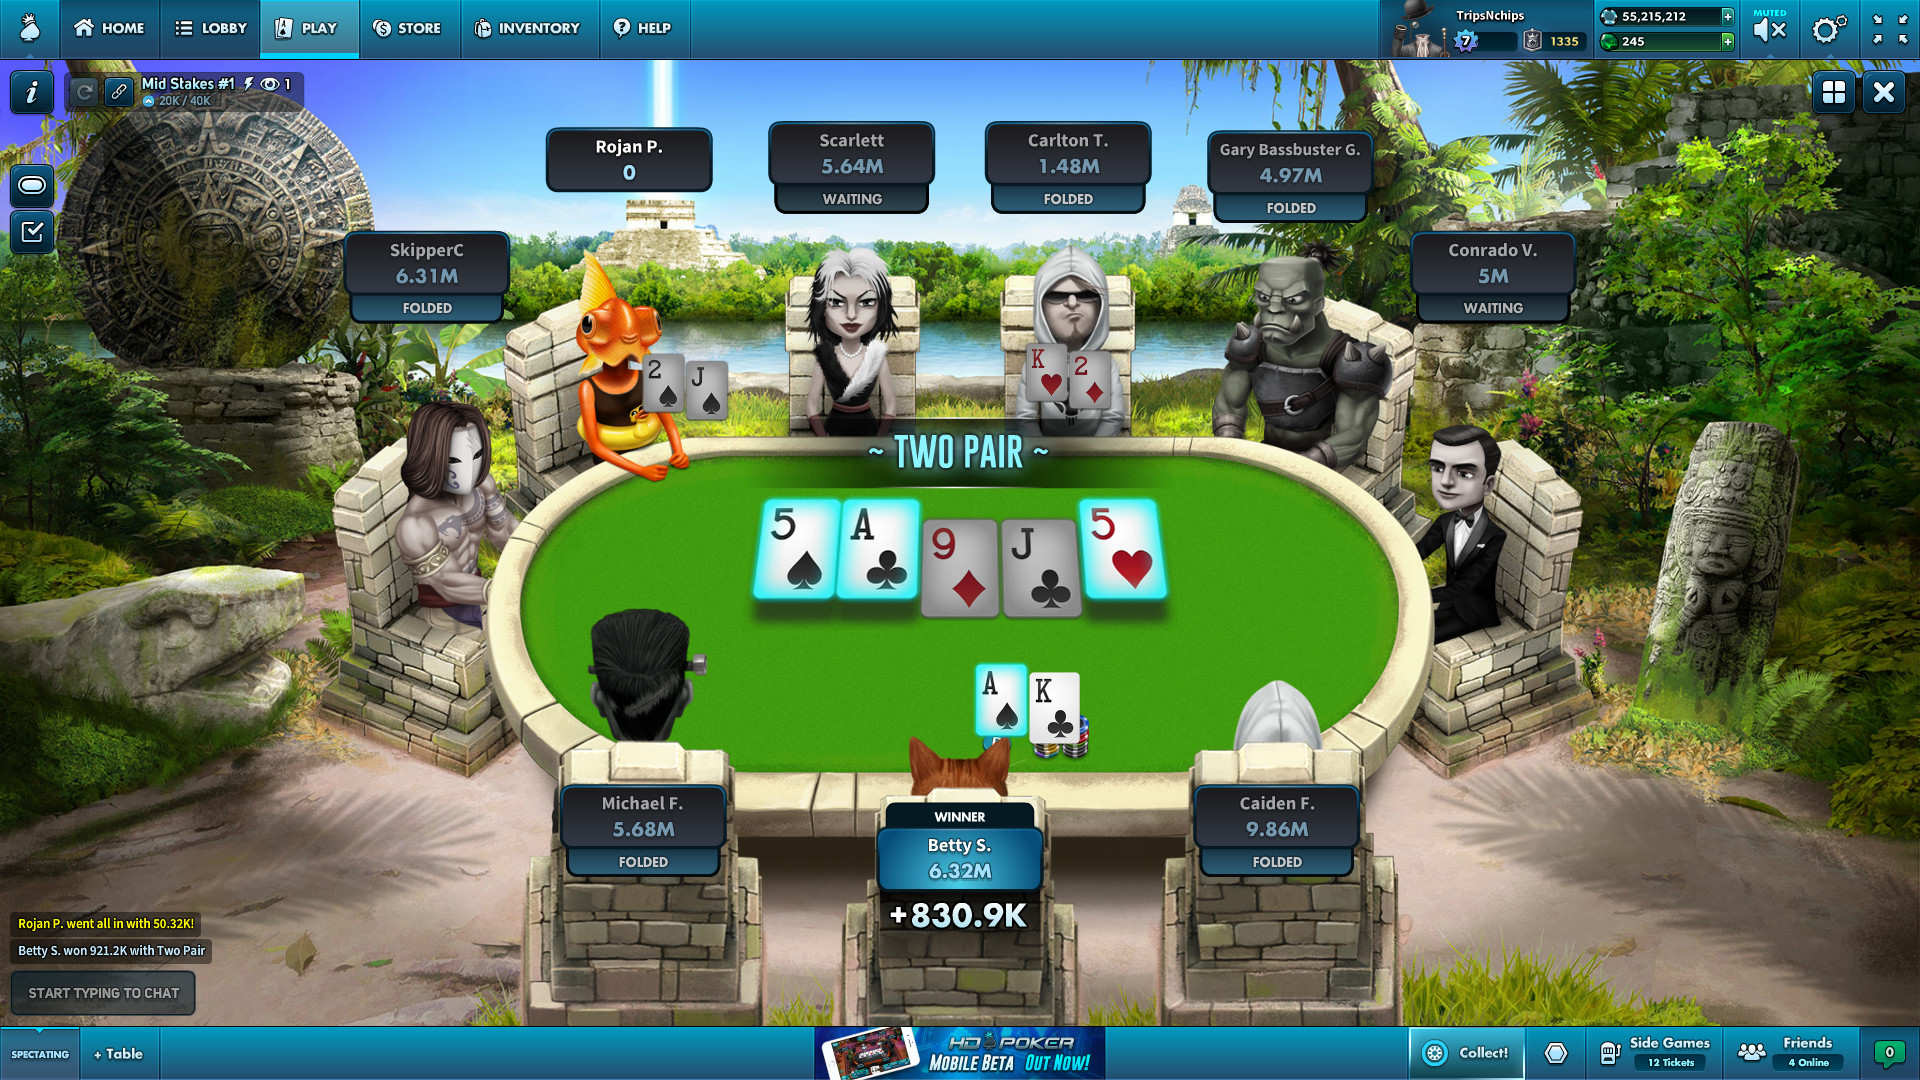 online texas holdem games with friends